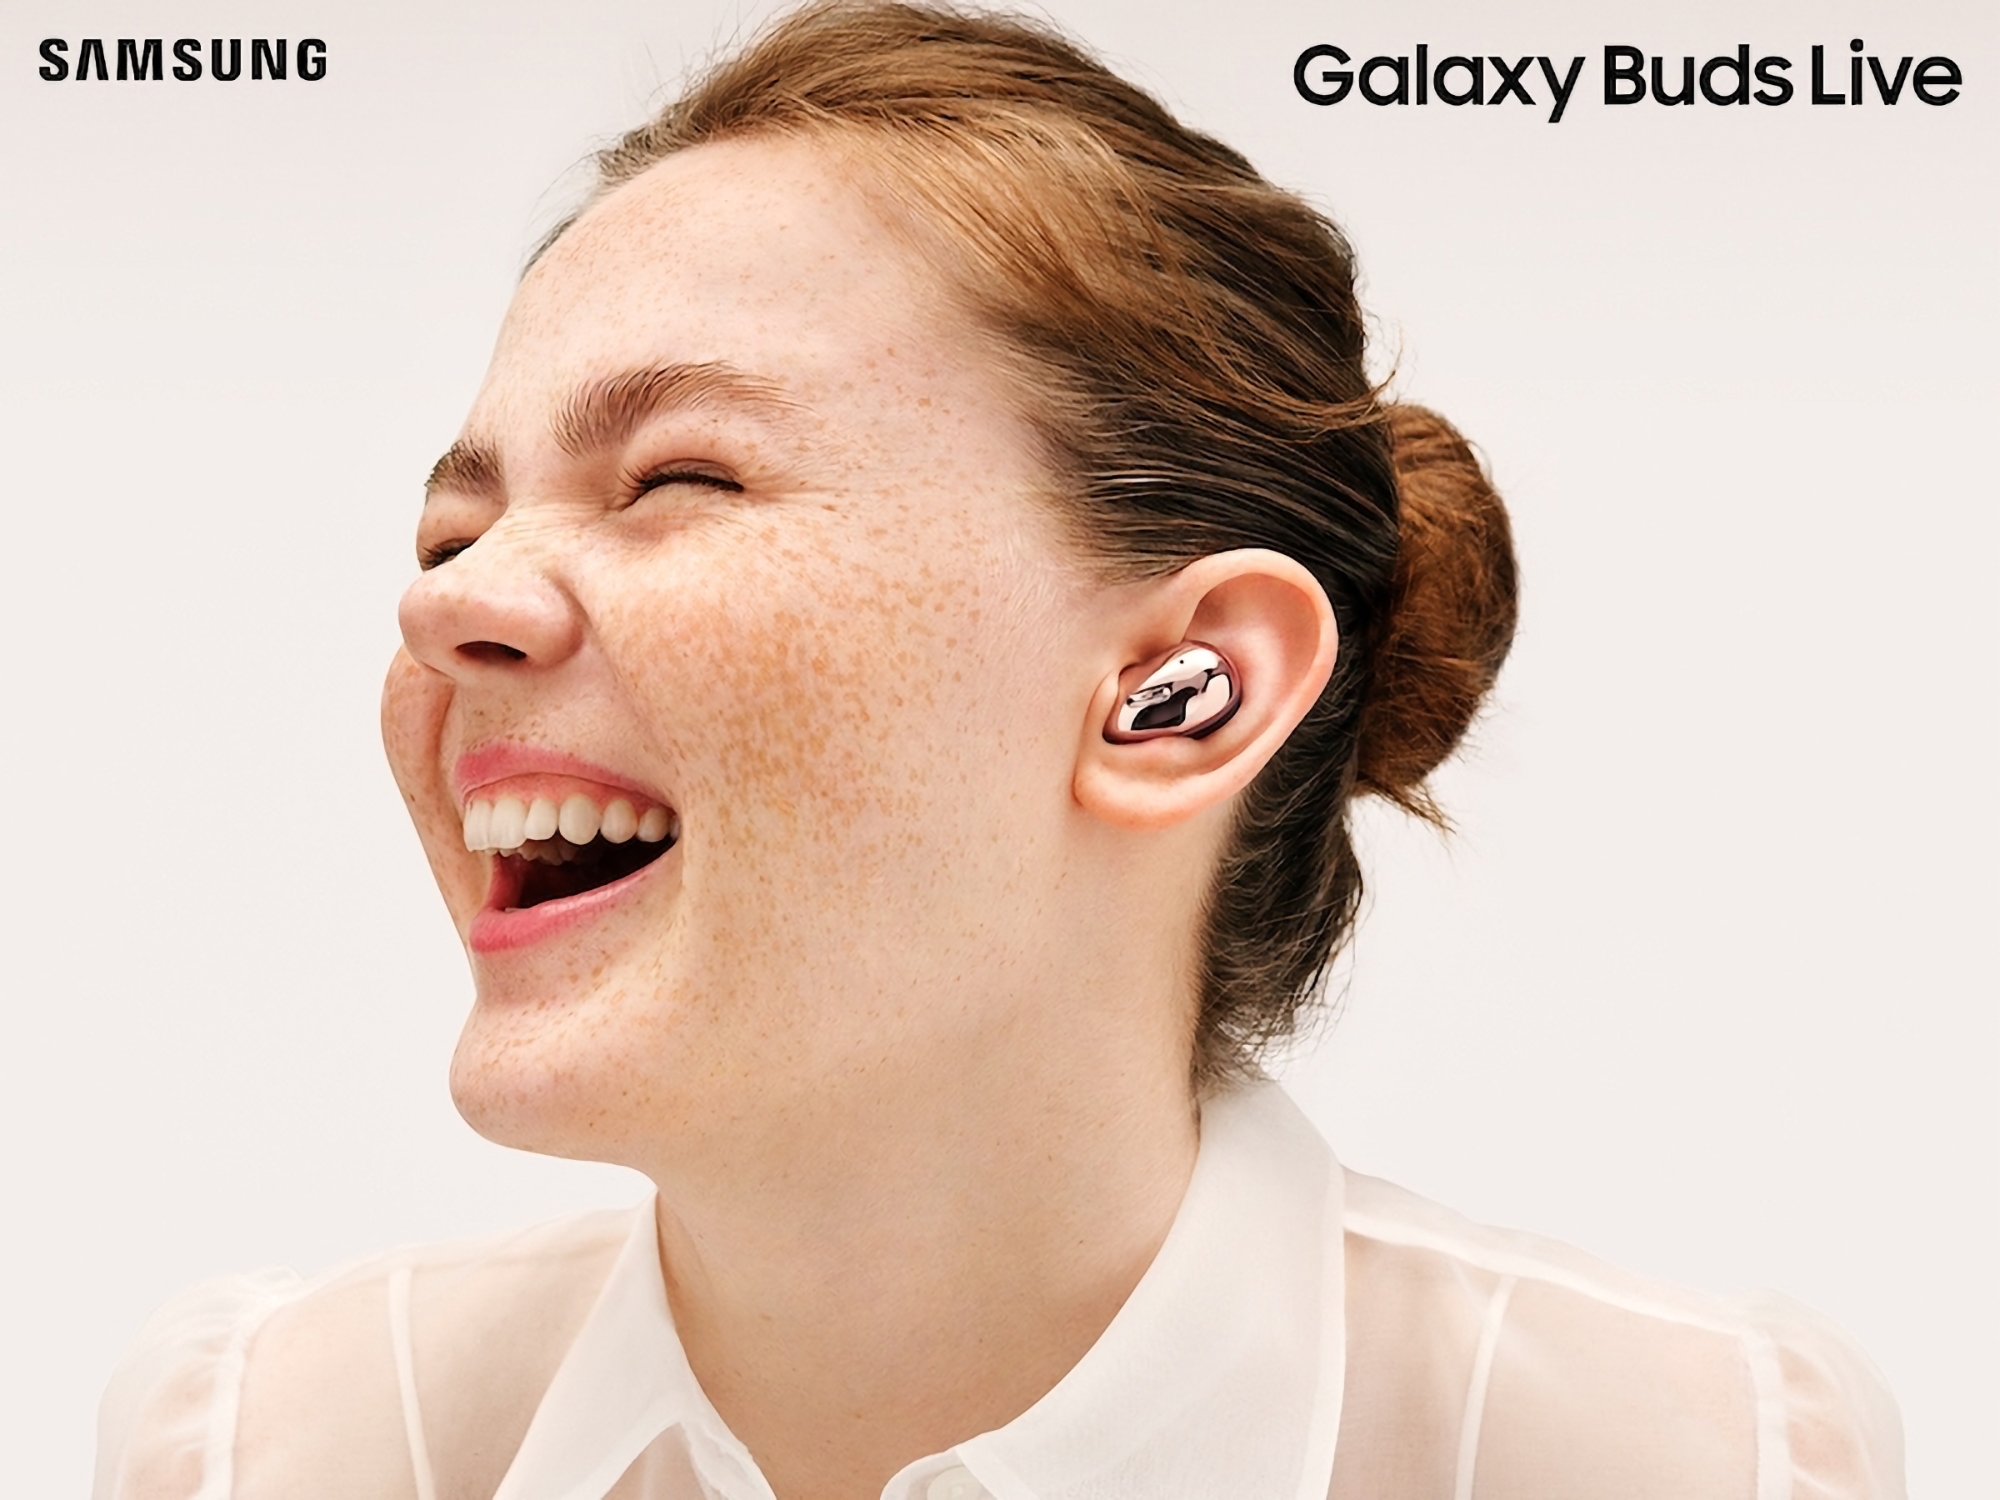 Rumour: Samsung has no plans to release a successor to Galaxy Buds Live